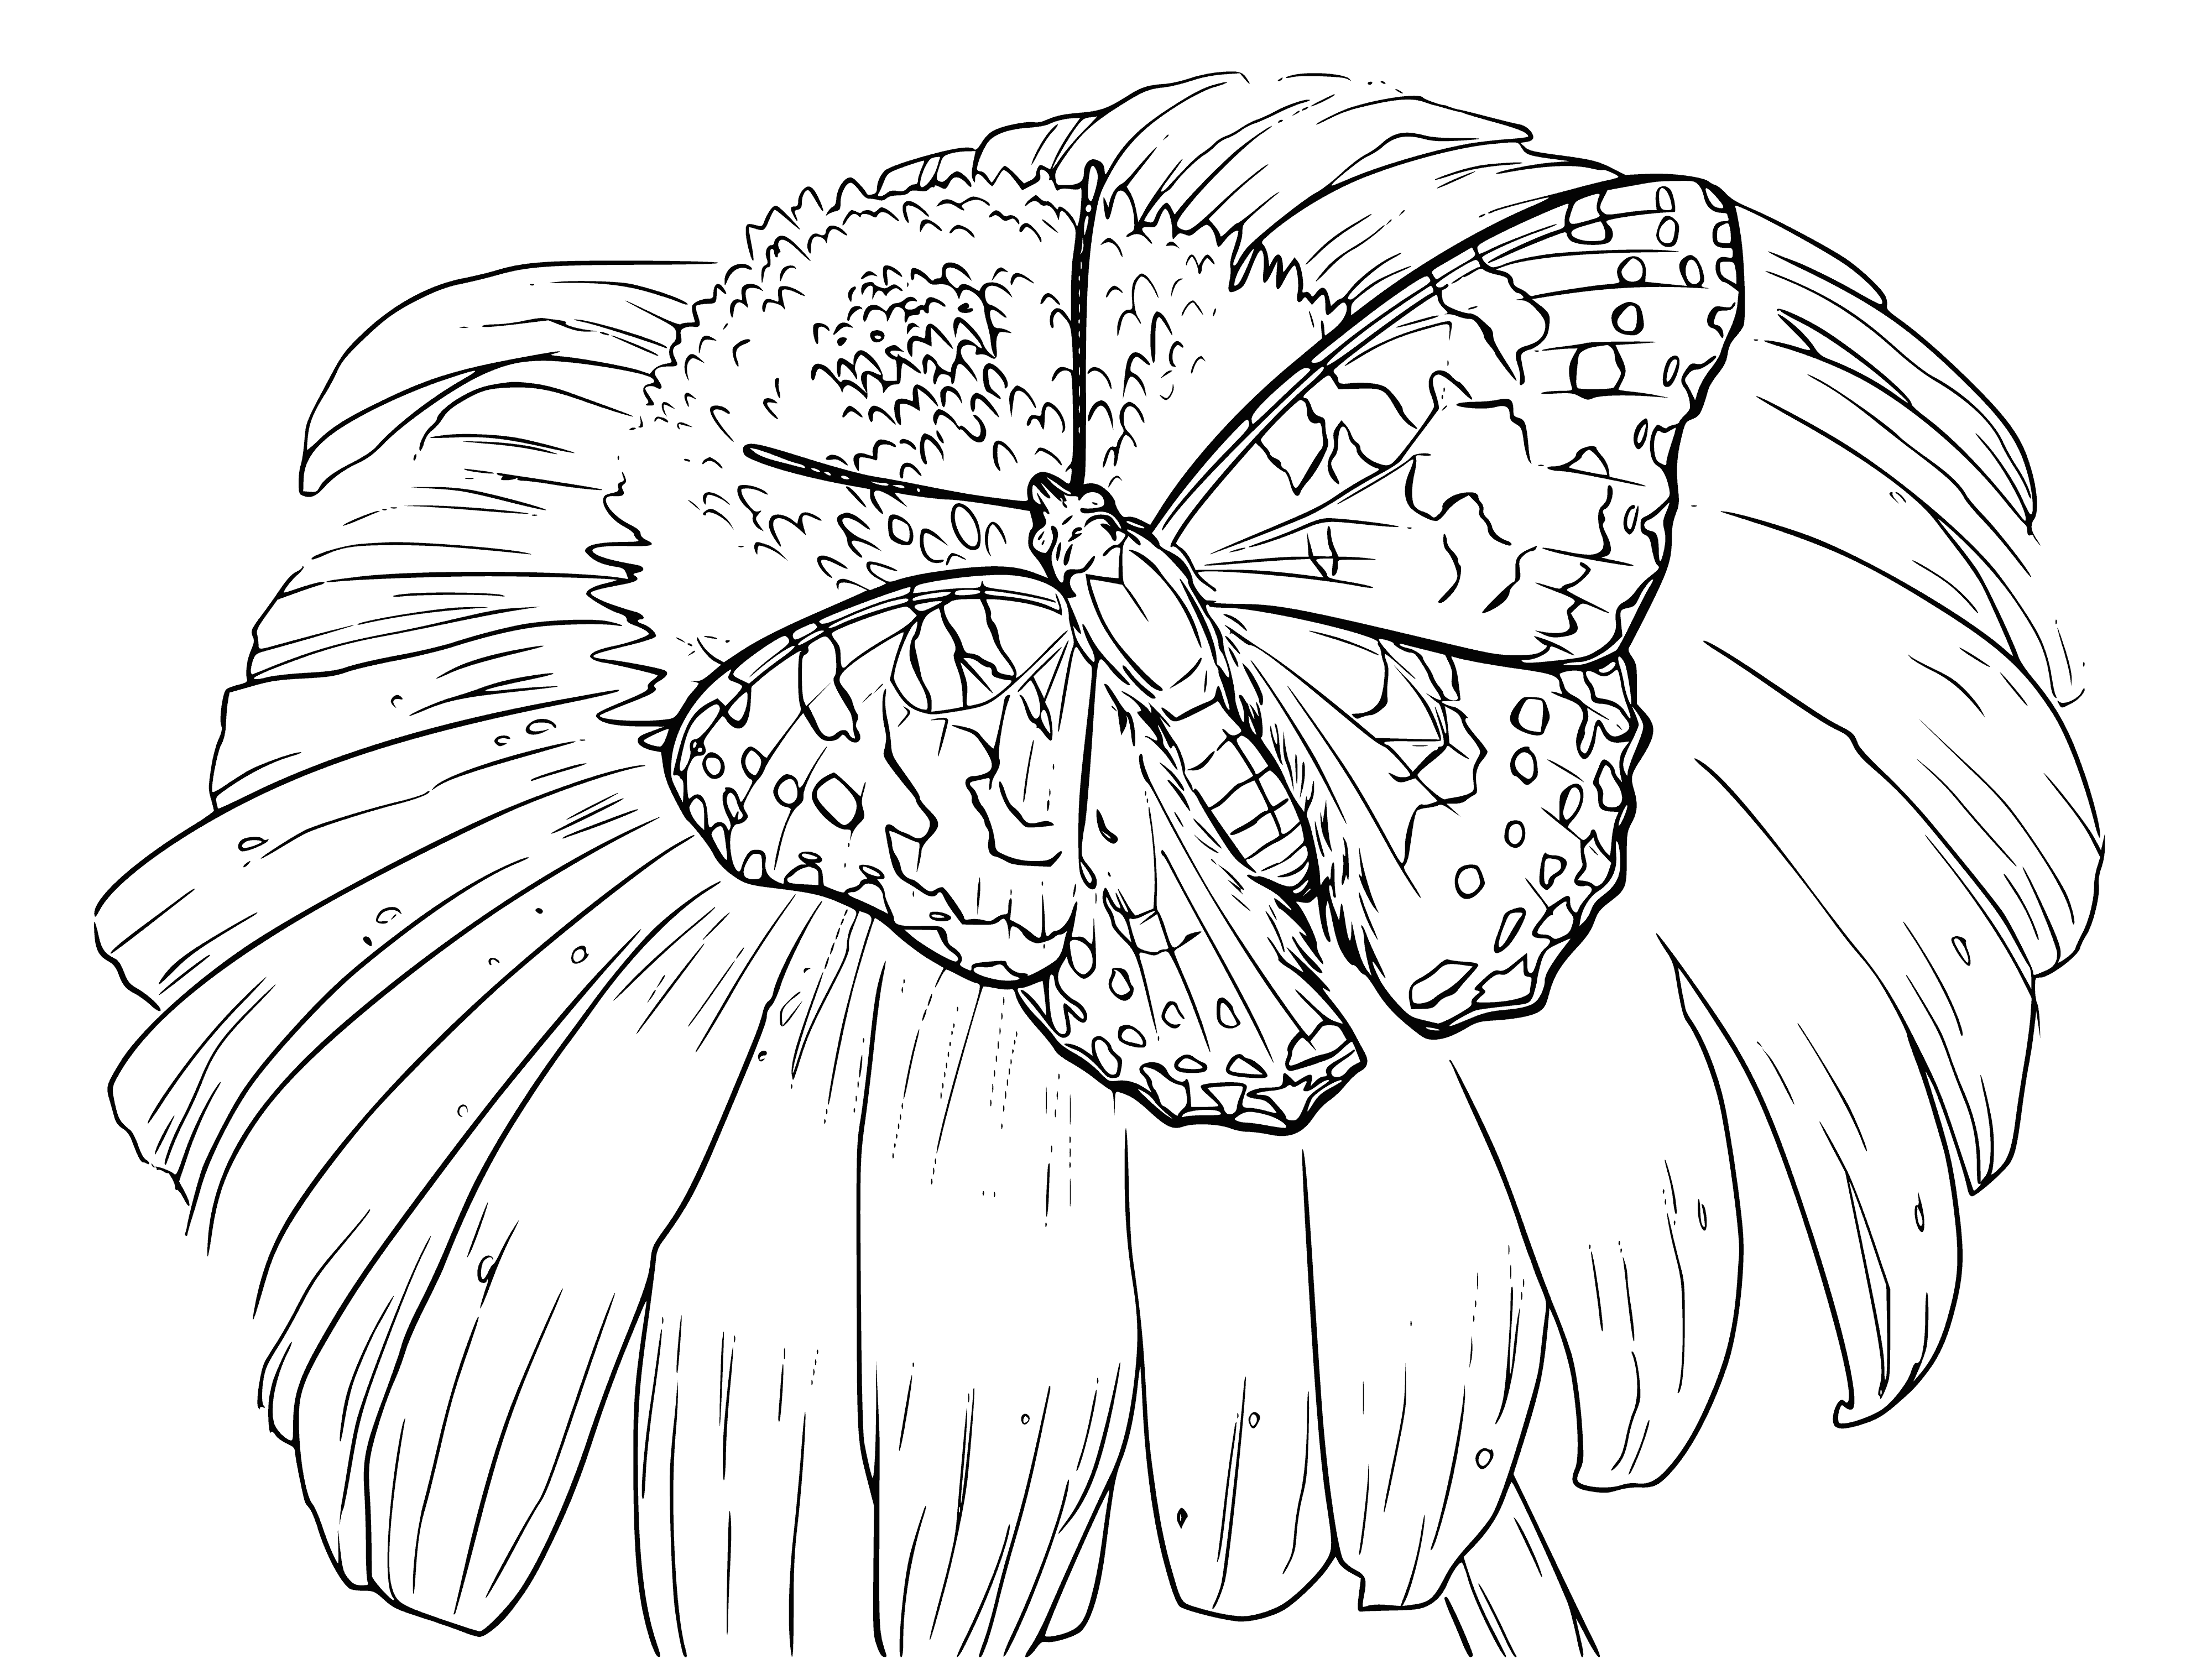 Butterfly on camomile coloring page